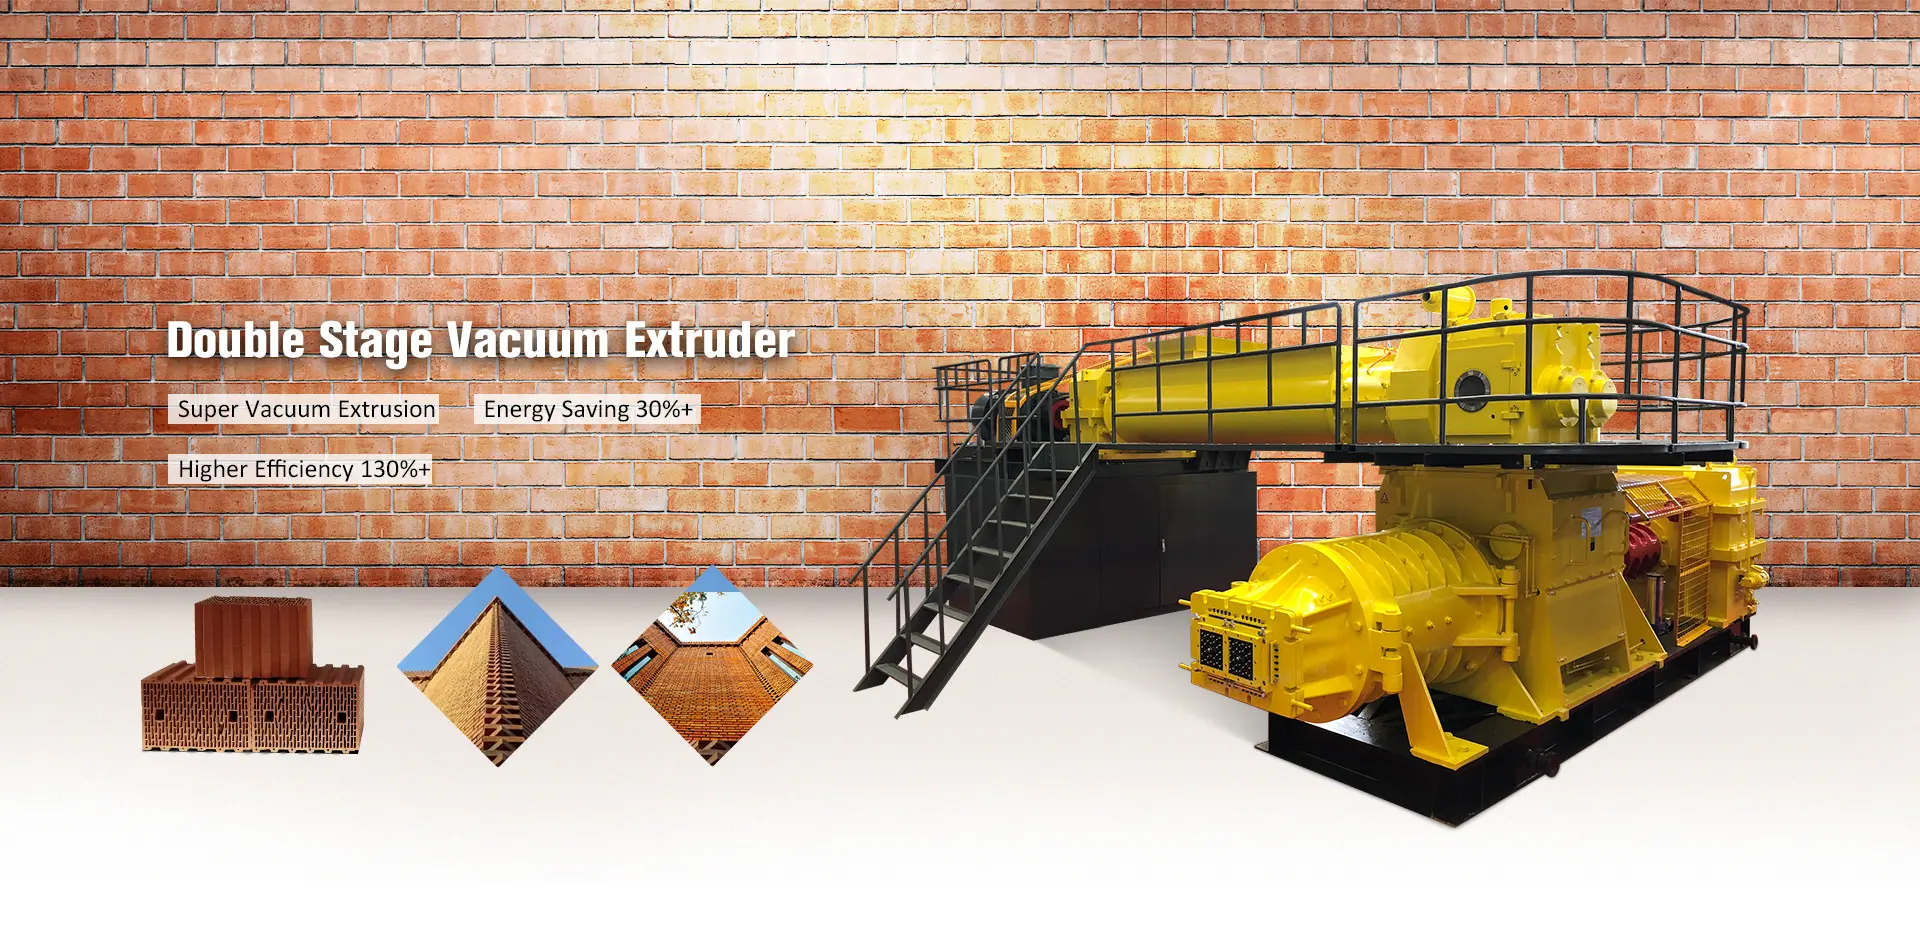 Vacuum extruder is a hard plastic vacuum extruding machine to shaping green bricks.